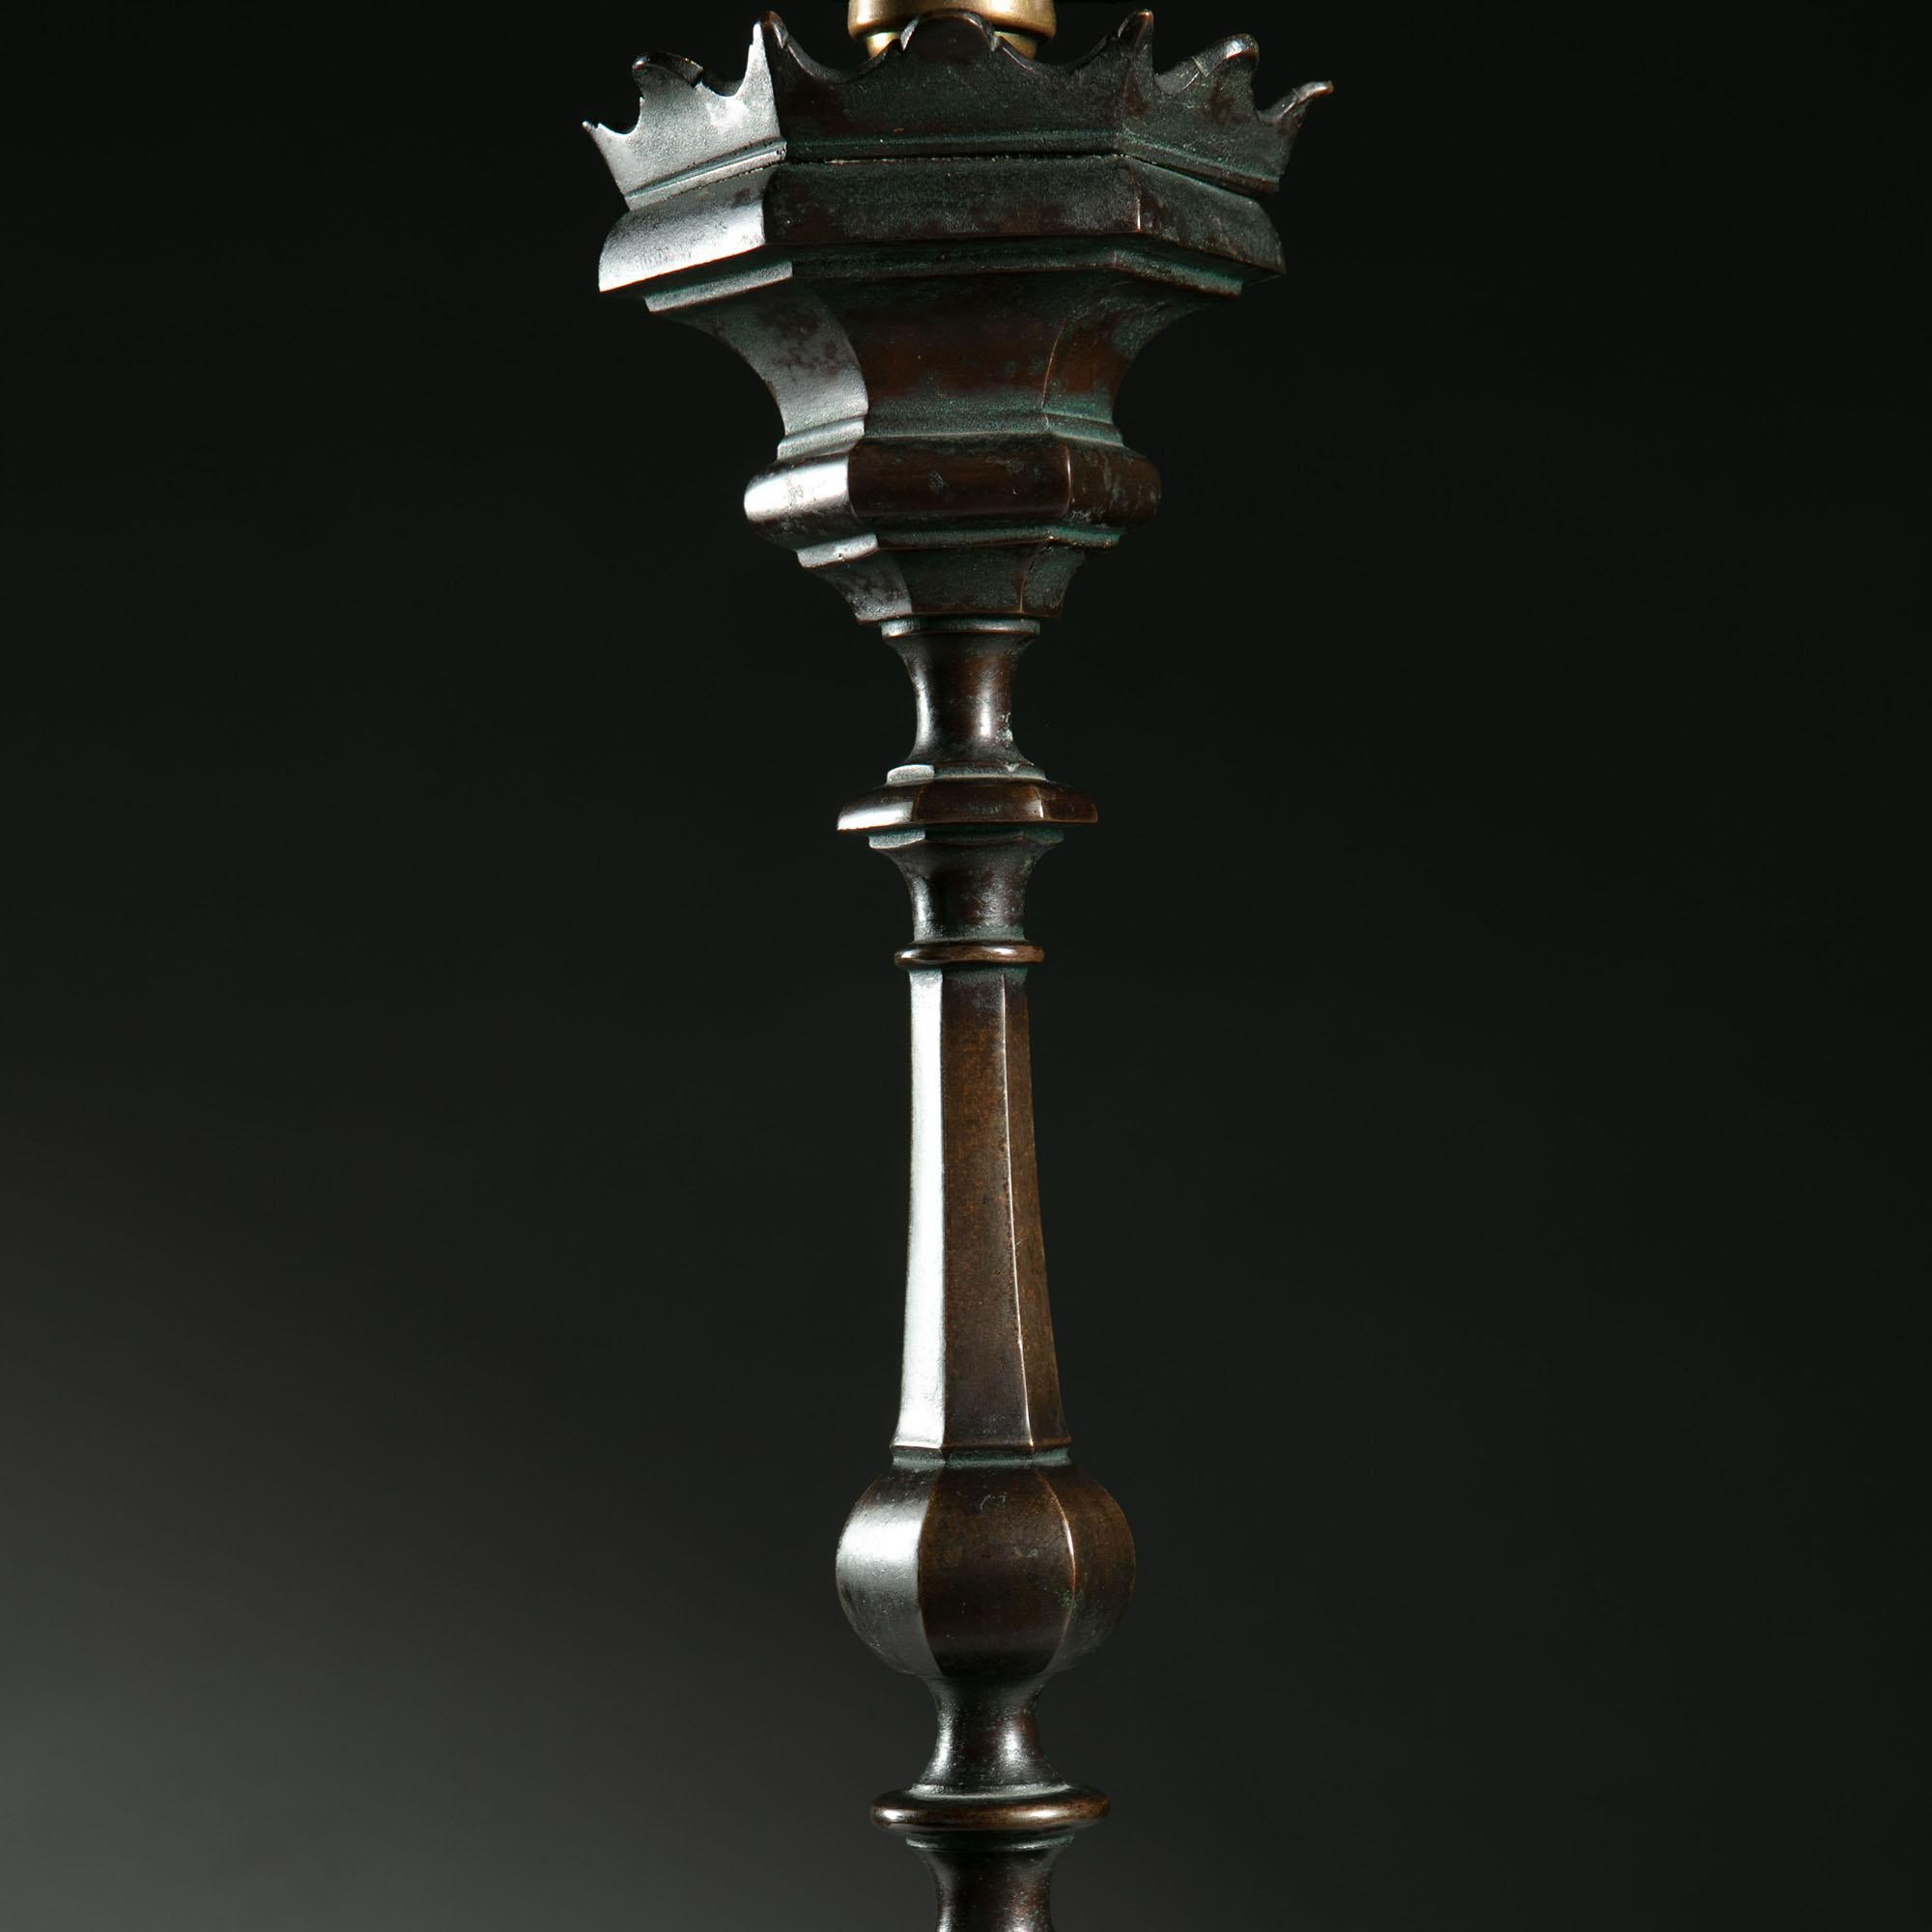 A mid-19th century bronze column lamp, with a tripod base.

Please note: Lampshade not included.

Currently wired for the UK.